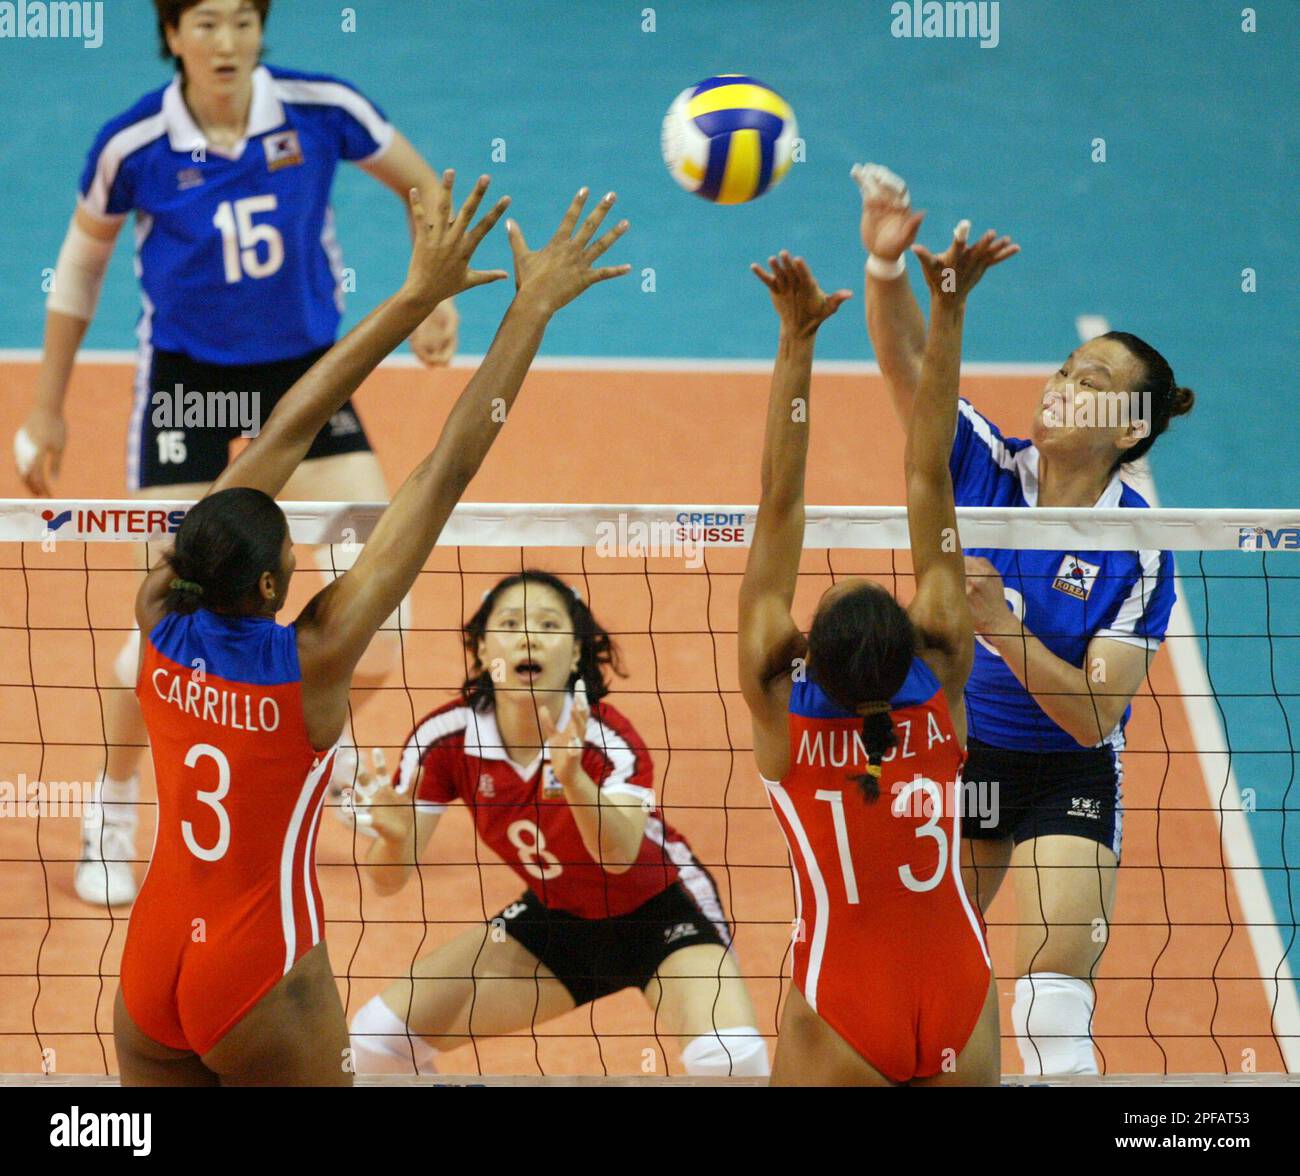 South Korea's Kwang-Hee Choi, right, smashes the ball towards Cuba's Nancy  Carrilo De La Paz, left, and Anniara Munoz Carrazana during their final  match for placing 5th or 6th at the Women's